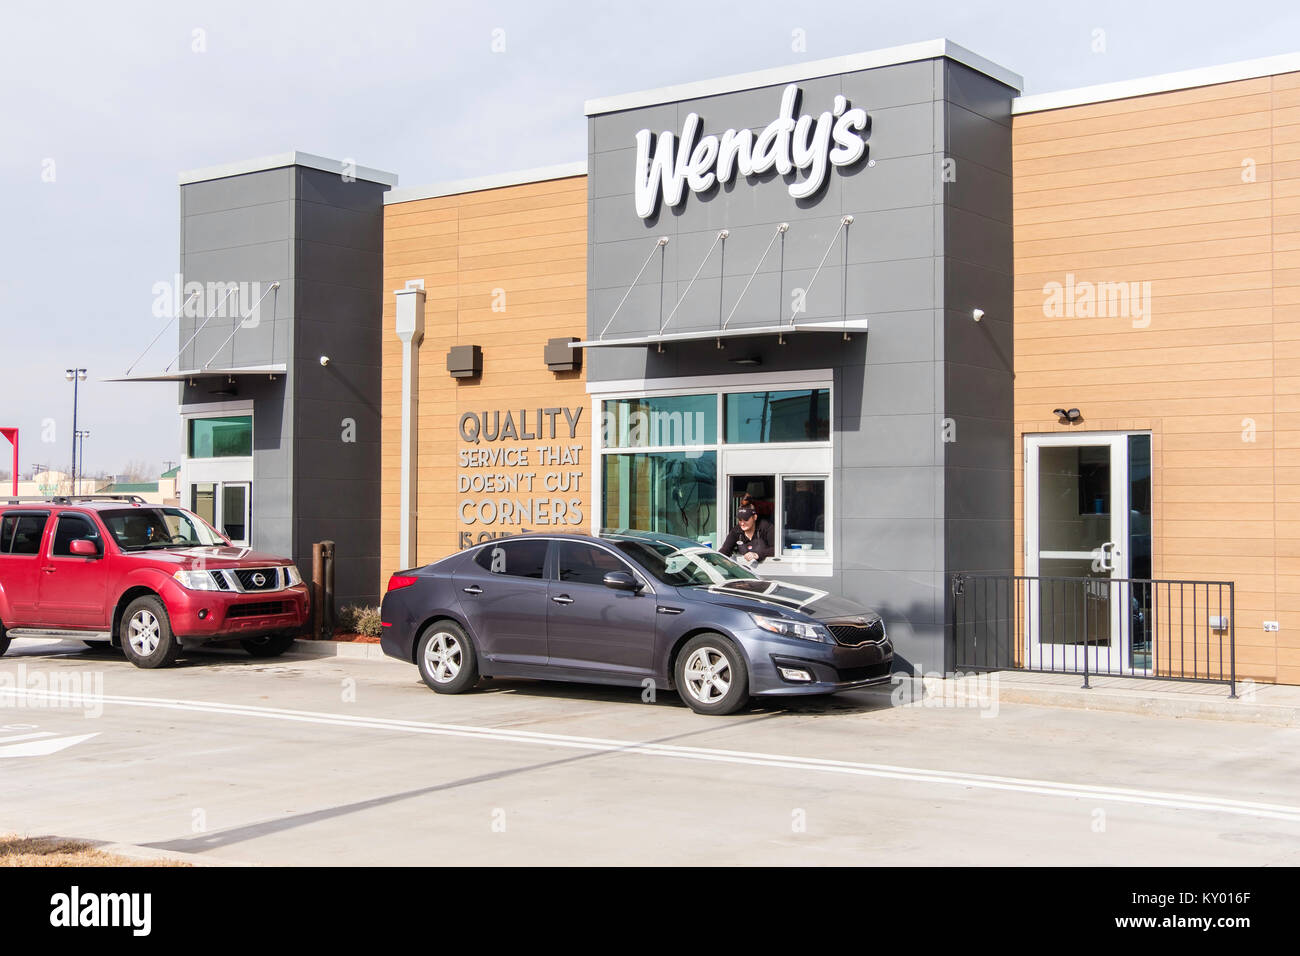 A line of customers in autos lined up at the takeout window at the opening of a new Wendy's restaurant. Oklahoma City, Oklahoma, USA. Stock Photo